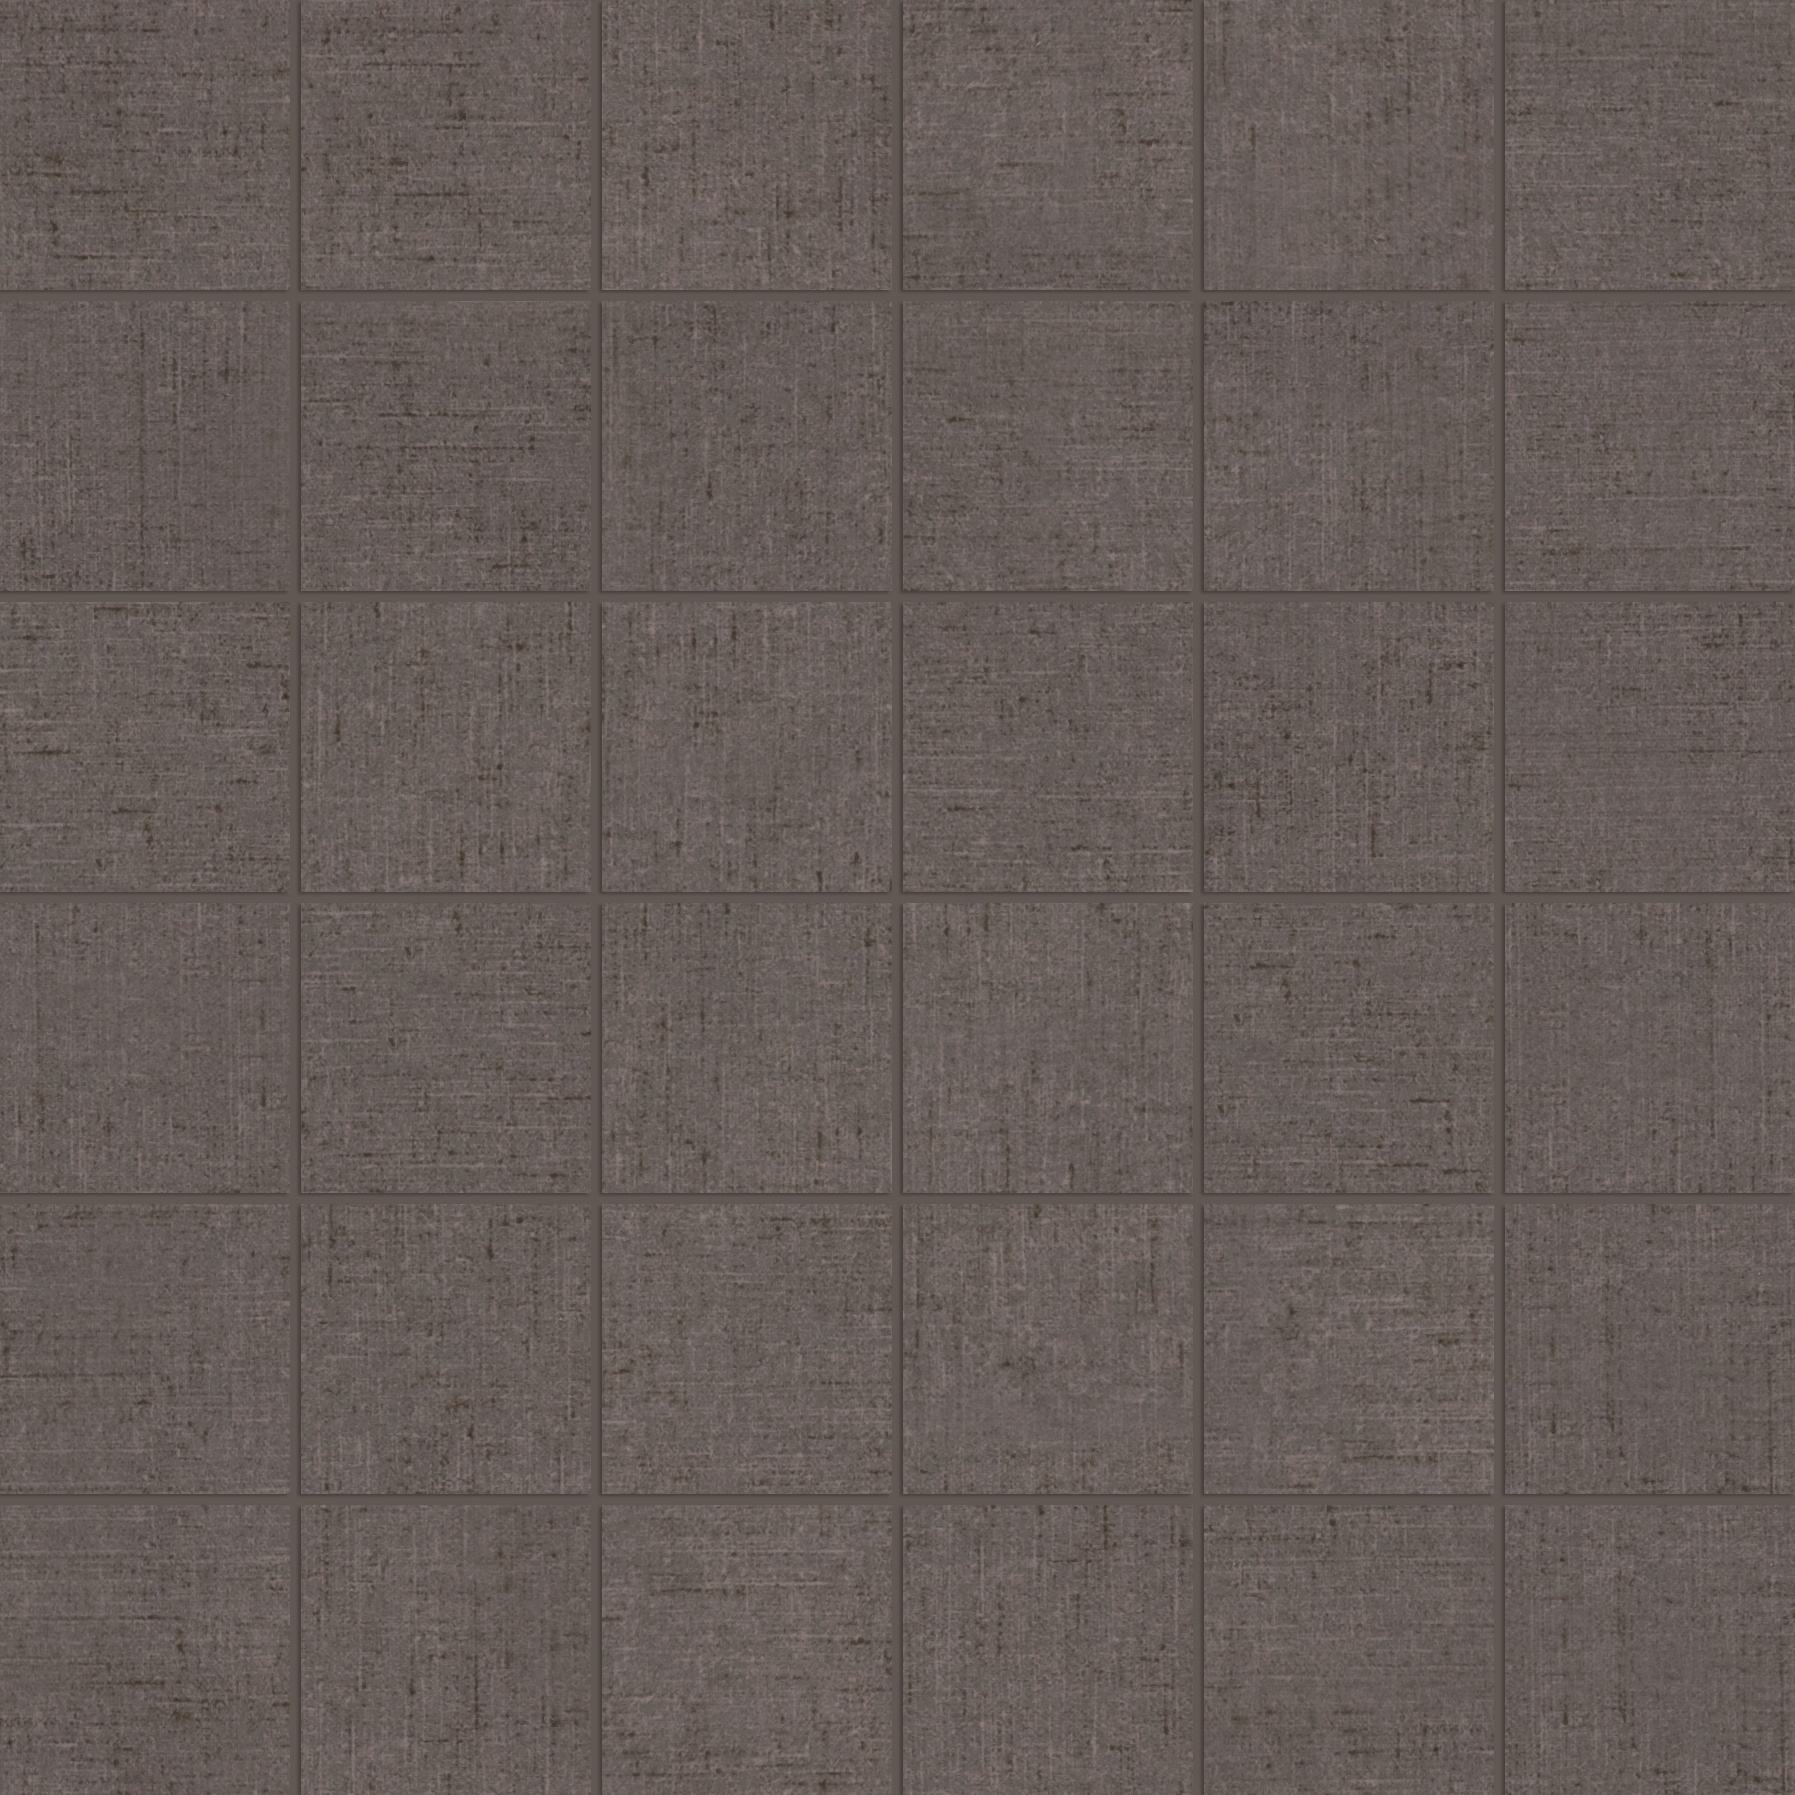 carbon straight stack 2x2-inch pattern glazed ceramic mosaic from keaton anatolia collection distributed by surface group international matte finish straight edge edge mesh shape